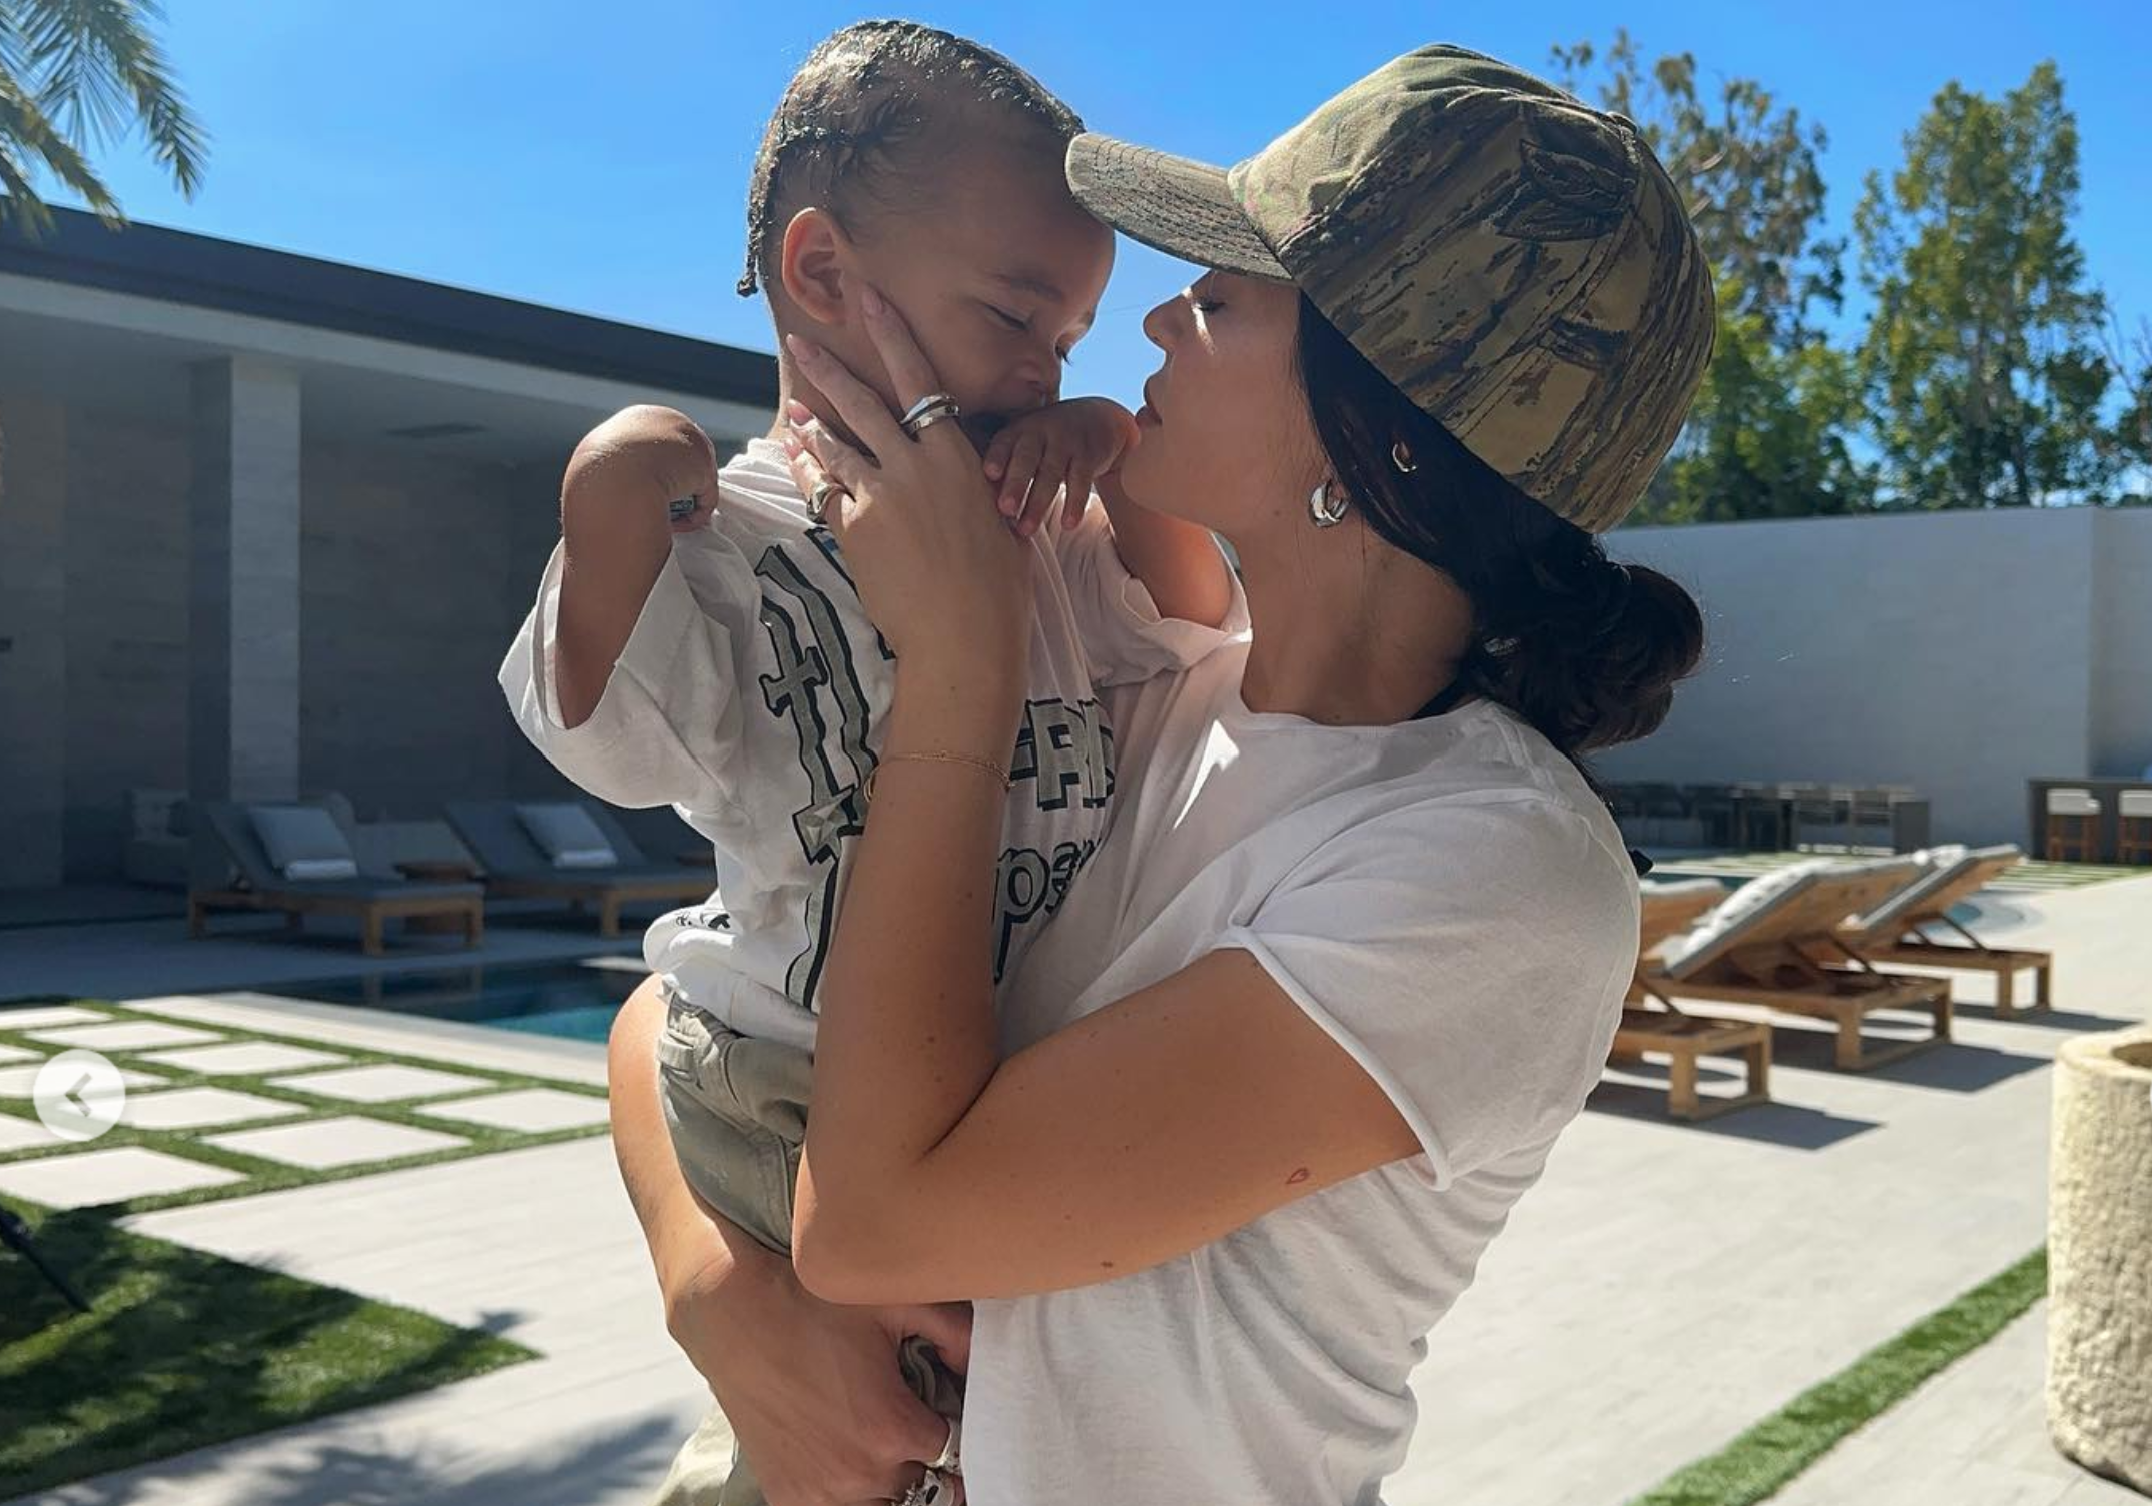 Kylie Jenner Shares Heartbreaking Reason Why She Changed Her Son's Name | Kylie Jenner is opening up about the events that took place that ultimately led to her changing her 1-year-old son’s name.